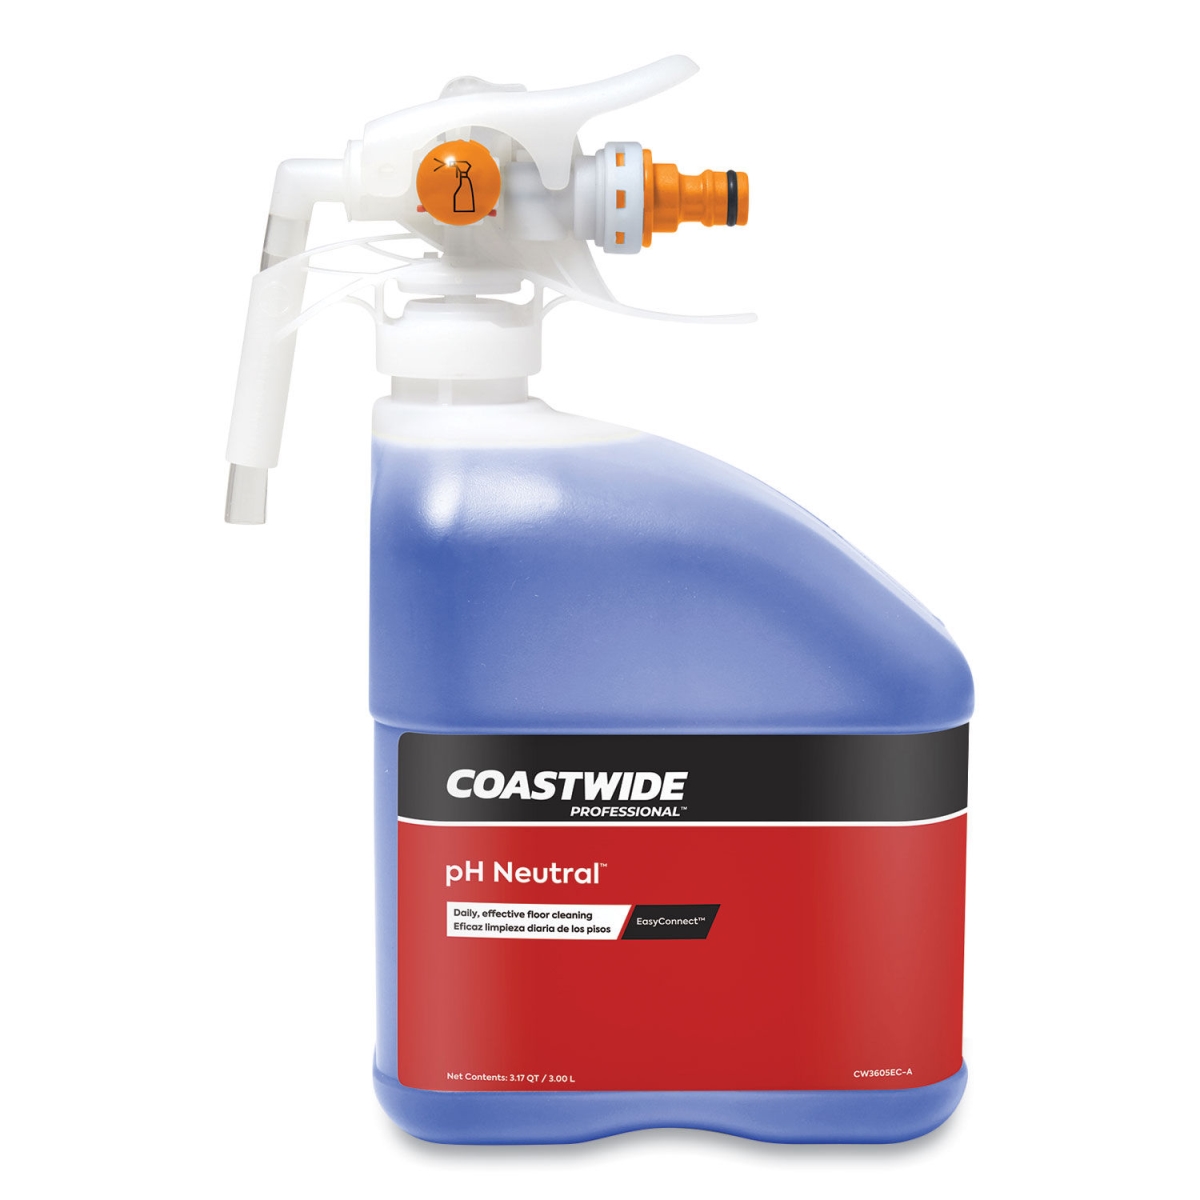 Picture of Coastwide Professional CW3605EC-A 3 Liter pH Neutral Daily Floor Cleaner Concentrate for Easy Connect Systems Strawberry Scent - 2 per Pack